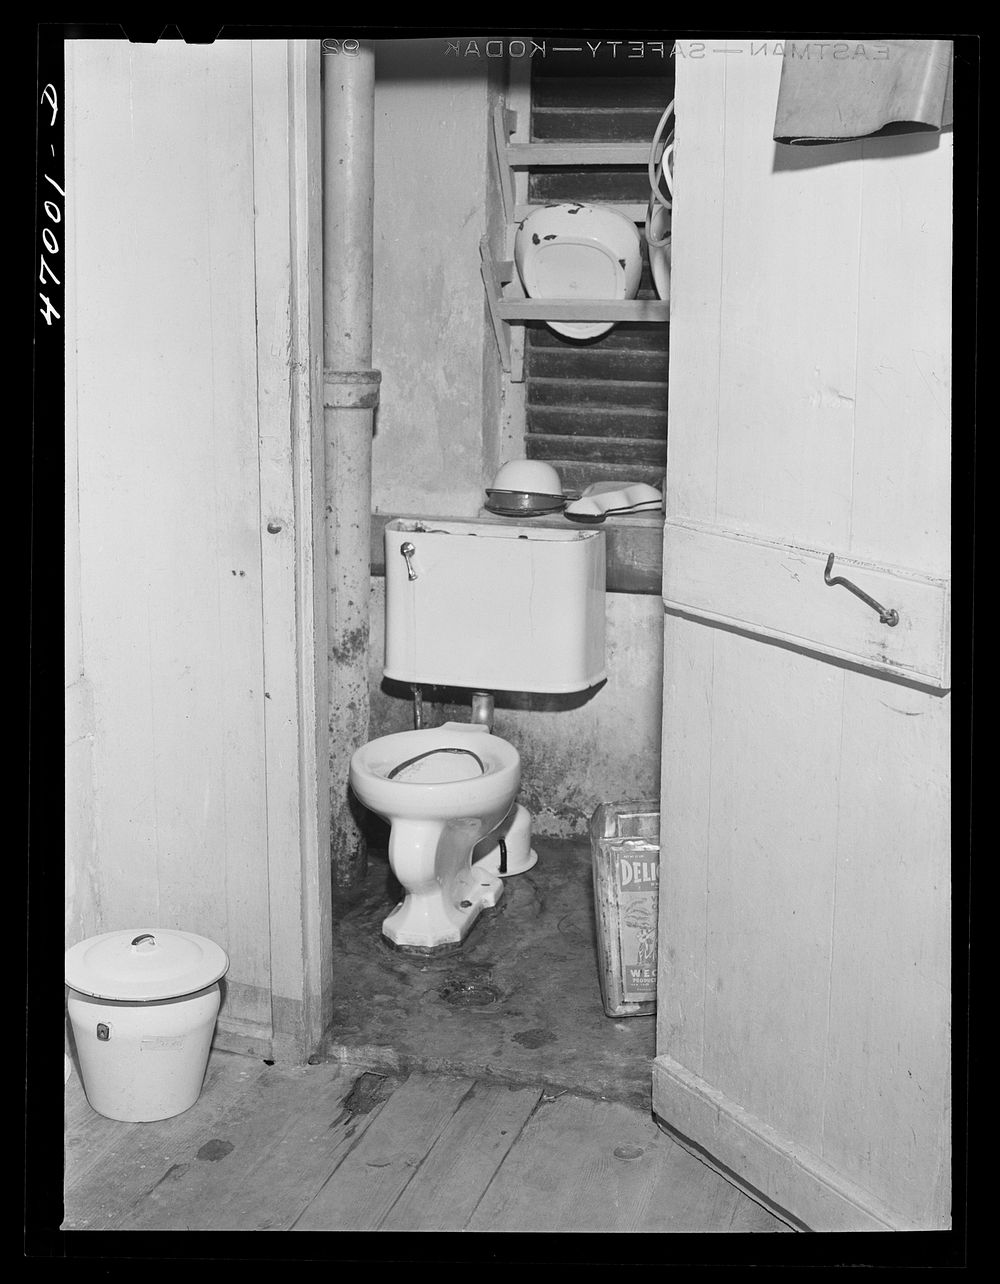 Frederiksted, Saint Croix Island, Virgin Islands. Toilet for the women's ward in Frederiksted hospital. Sourced from the…